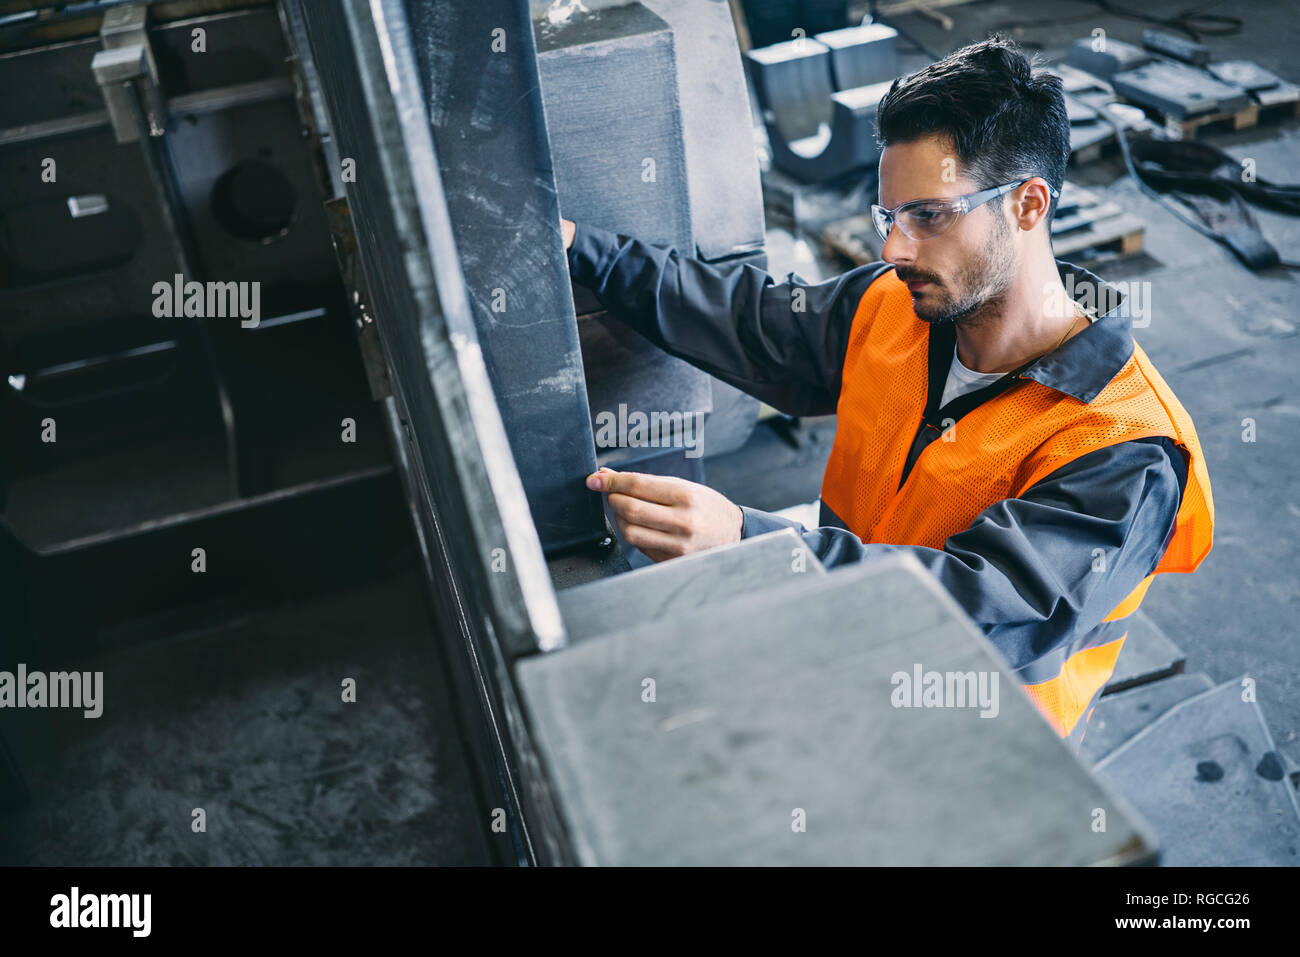 Man wearing protective workwear working in factory Stock Photo